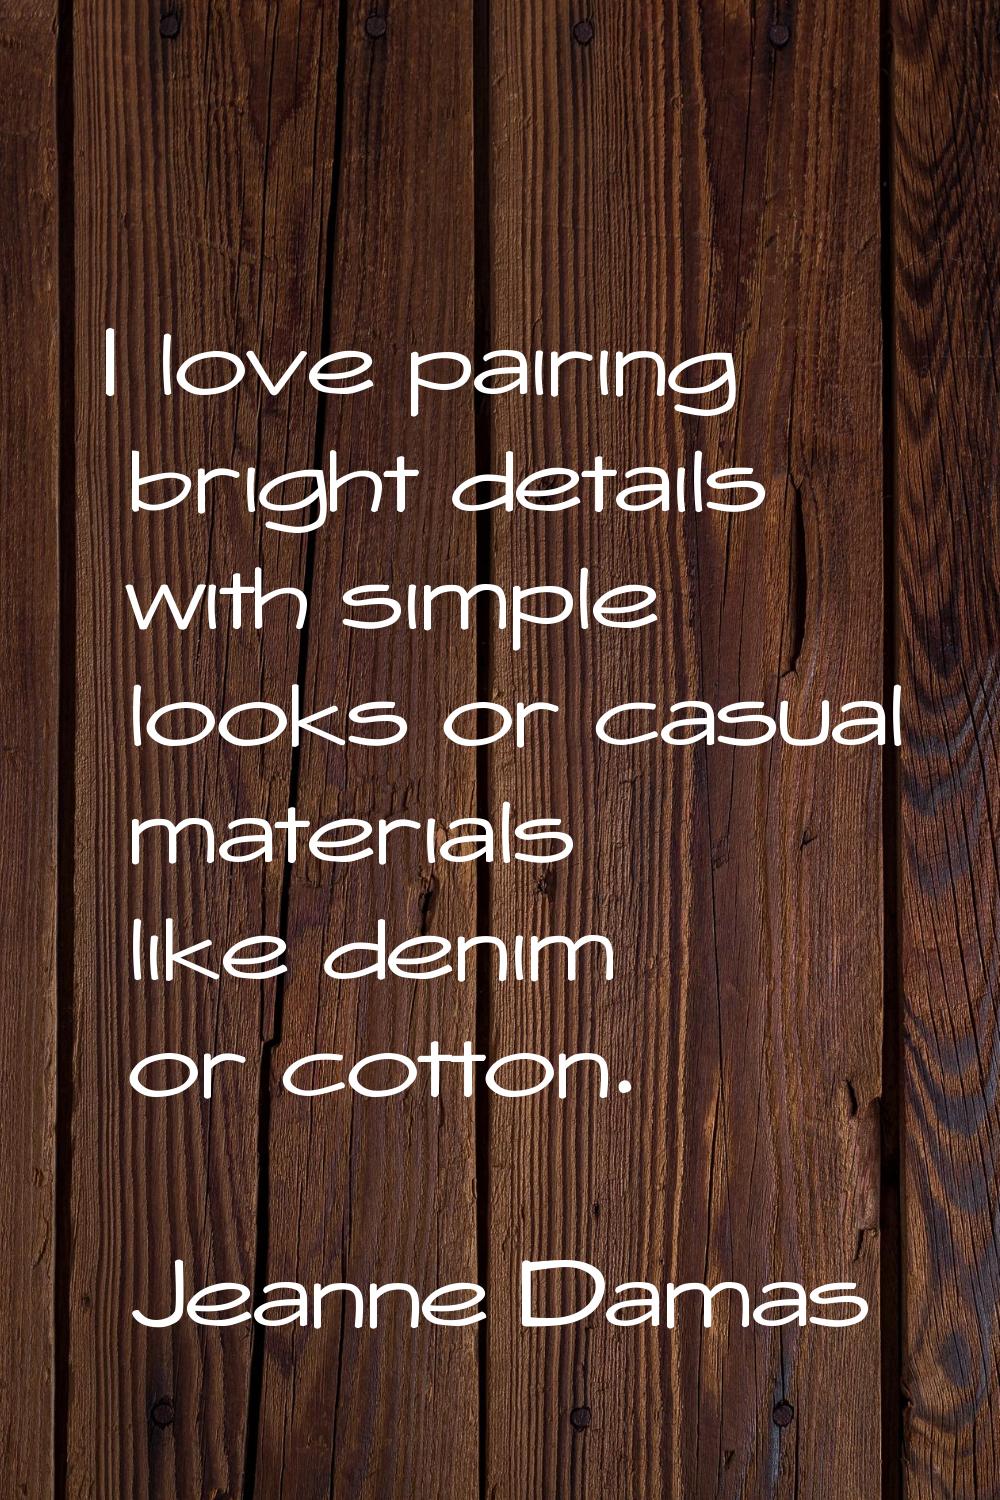 I love pairing bright details with simple looks or casual materials like denim or cotton.